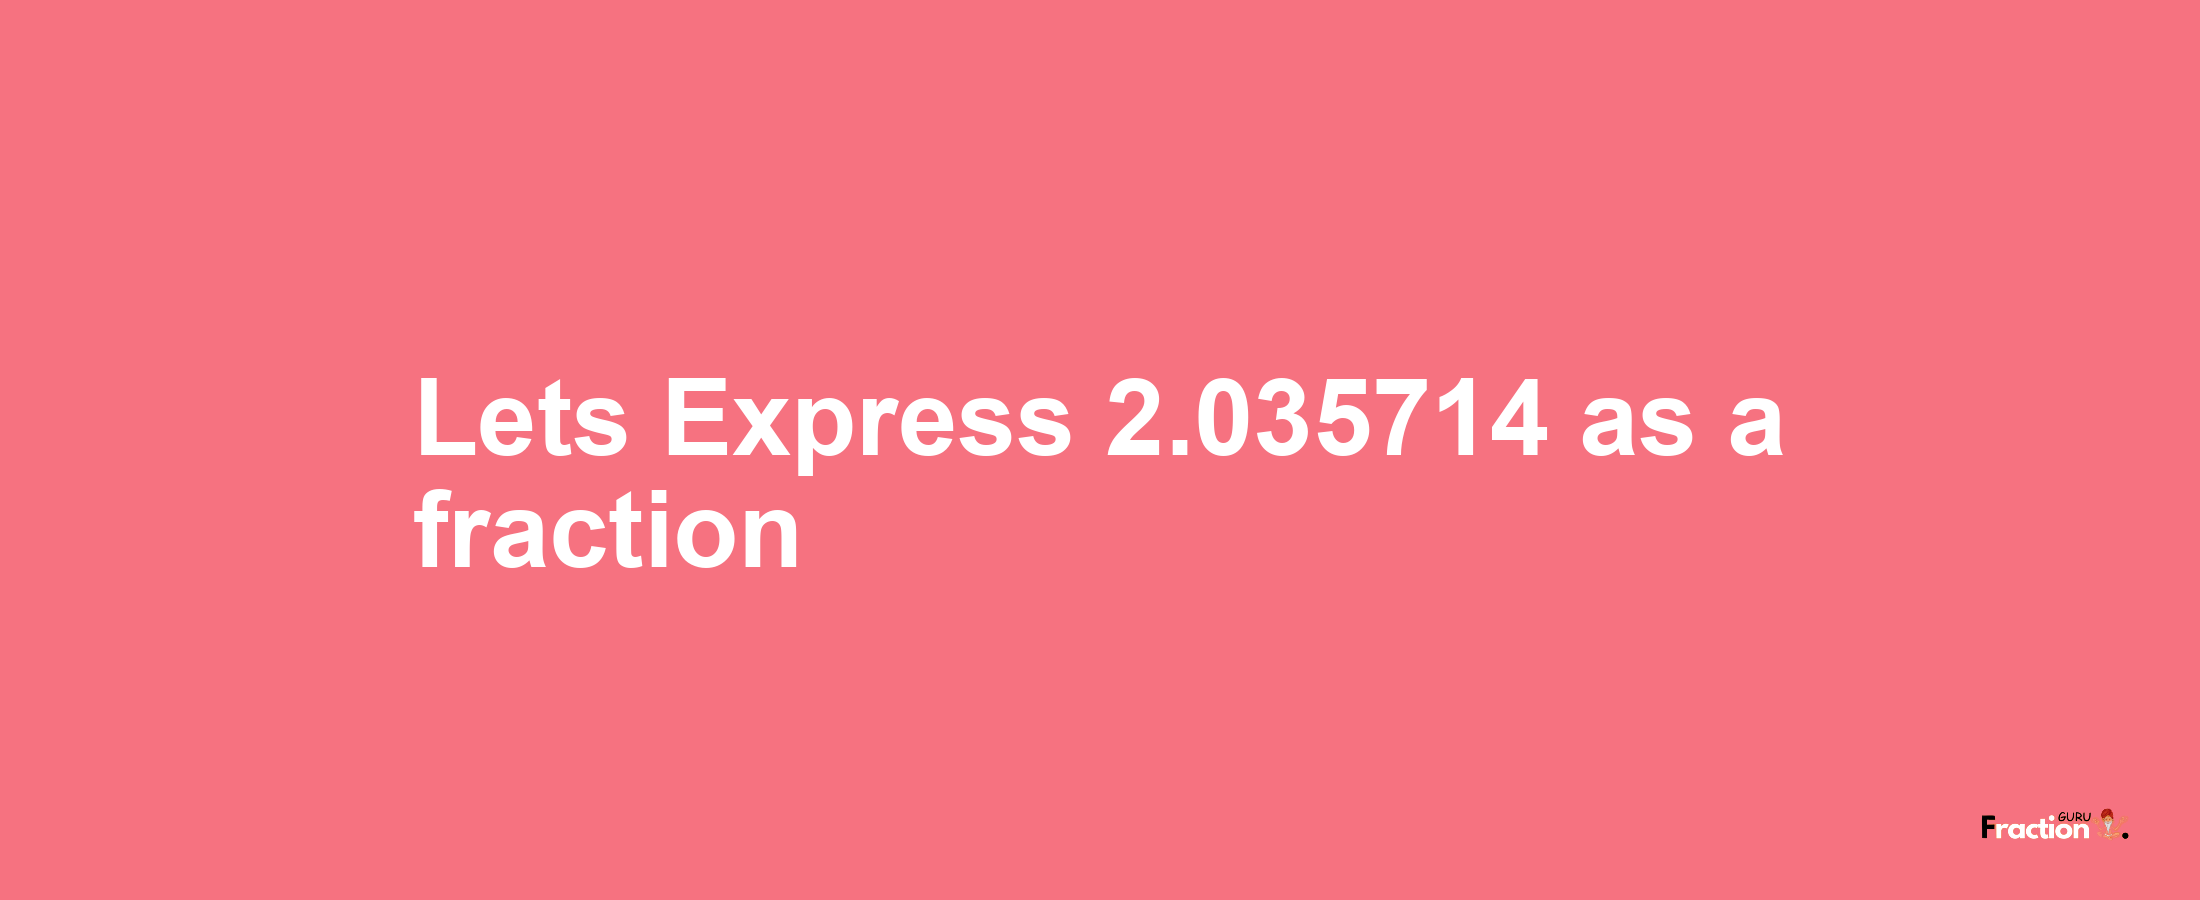 Lets Express 2.035714 as afraction